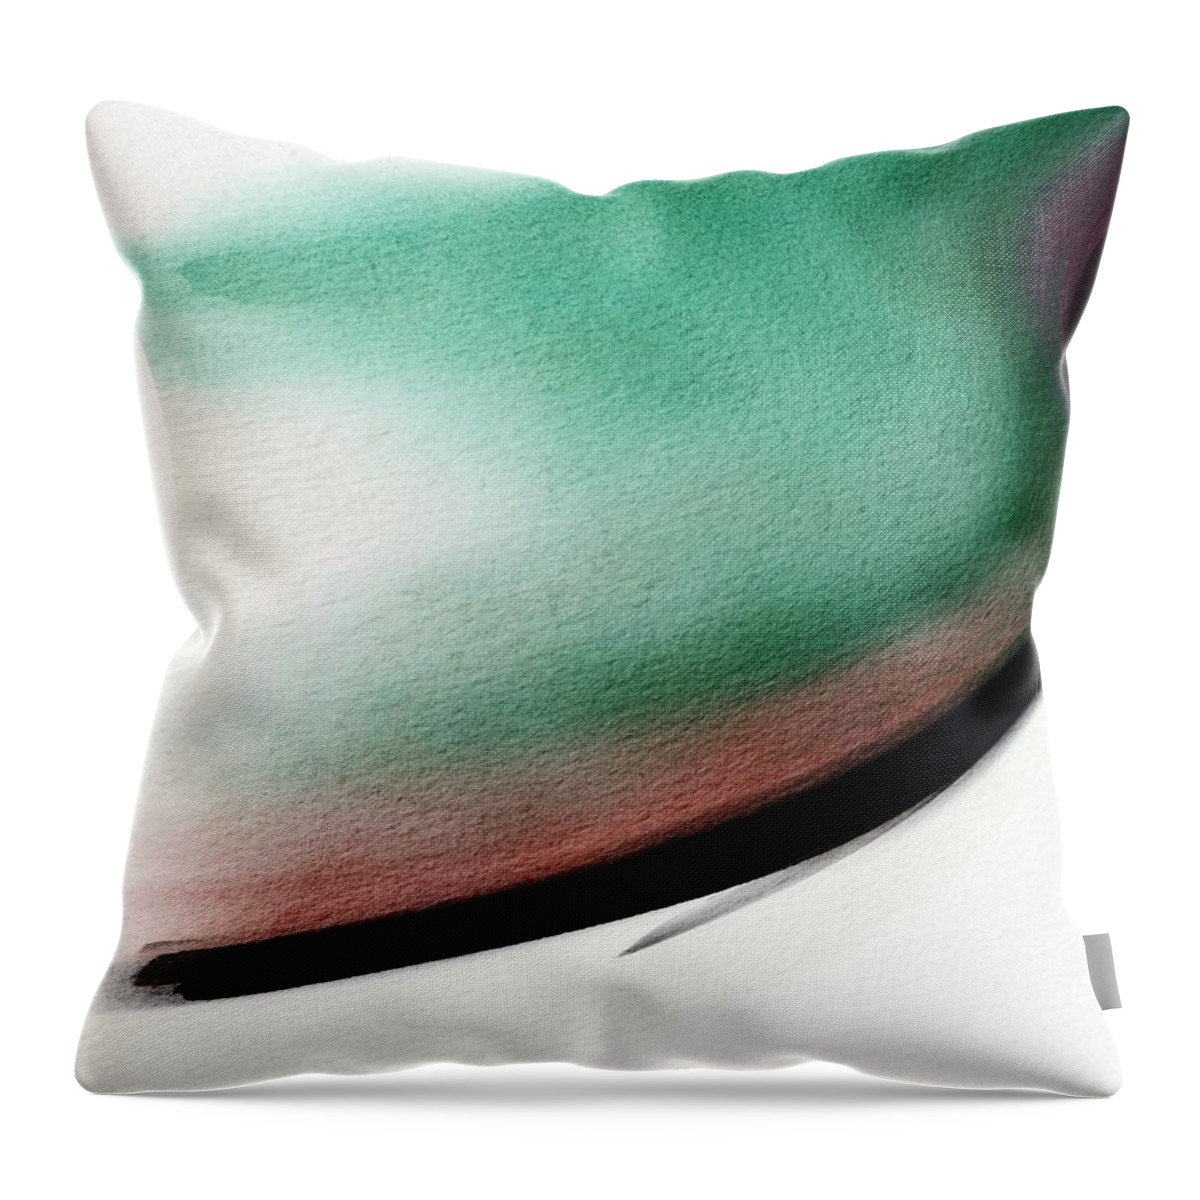 Movement Throw Pillow featuring the digital art Away Green Curved Abstract by Itsonlythemoon